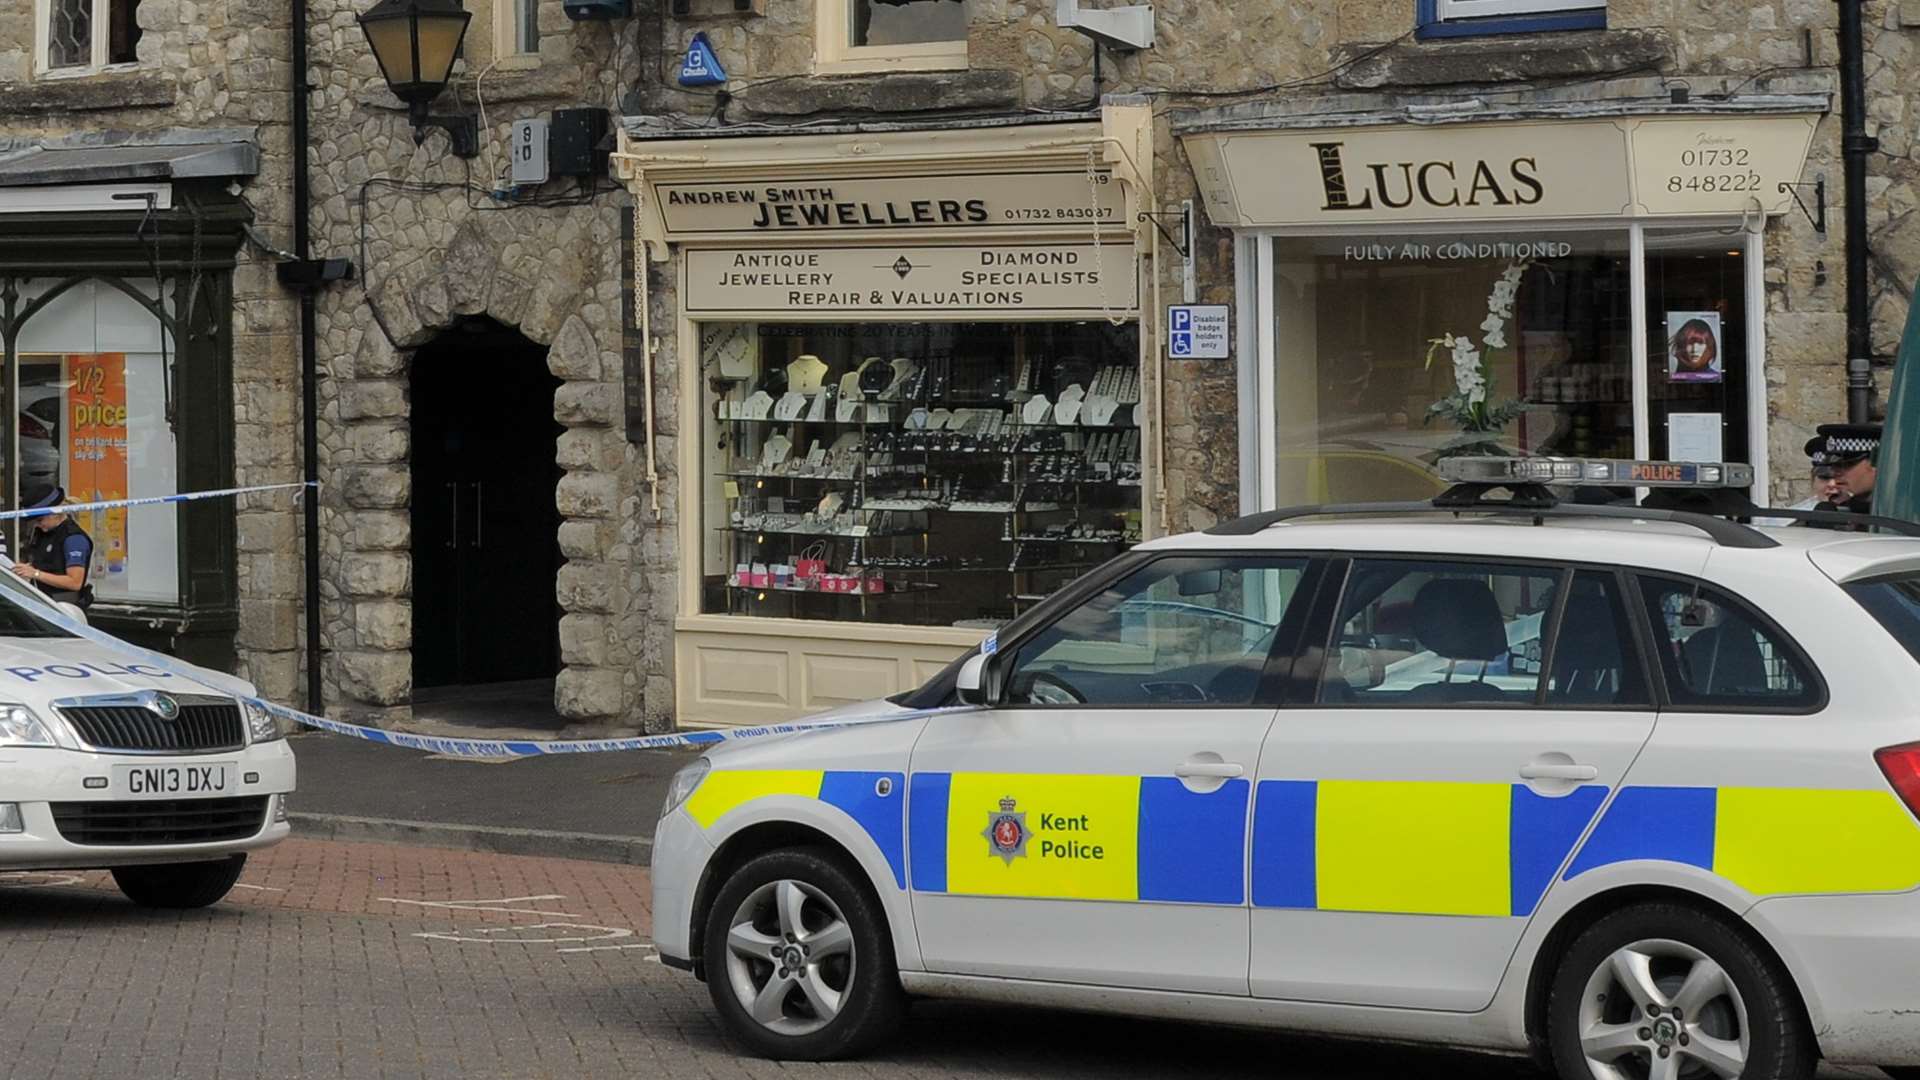 Armed robbers targeted Andrew Smith Jewellers, which is next to Lucas Hair in West Malling High Street, in 2013.